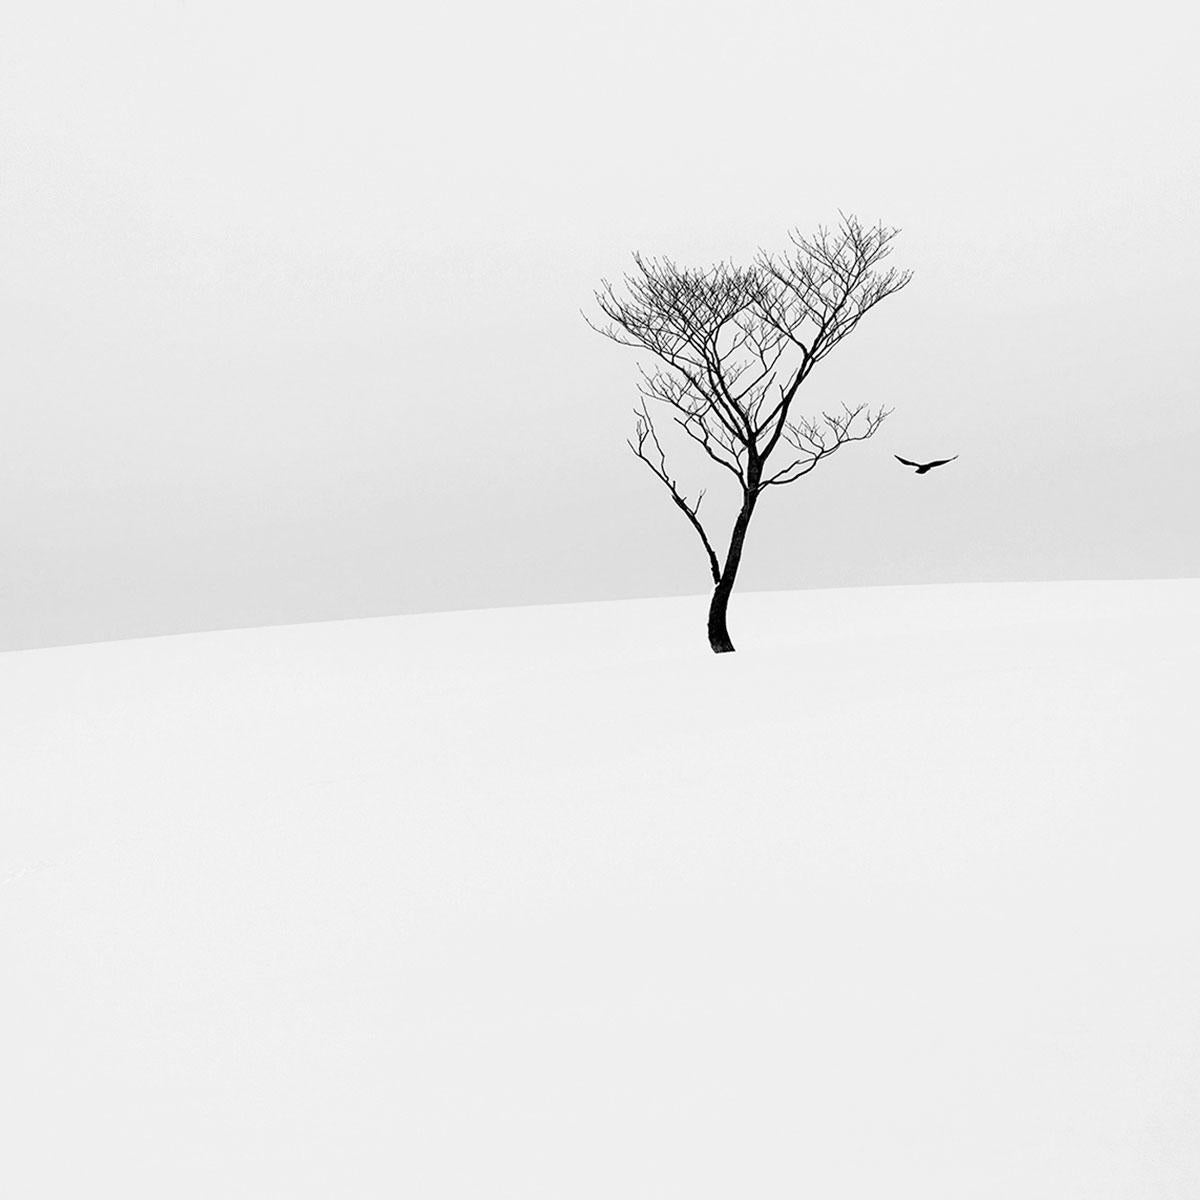 Eternal - ETHEREAL 1 by Alexandre Manuel (Black and white minimalist)